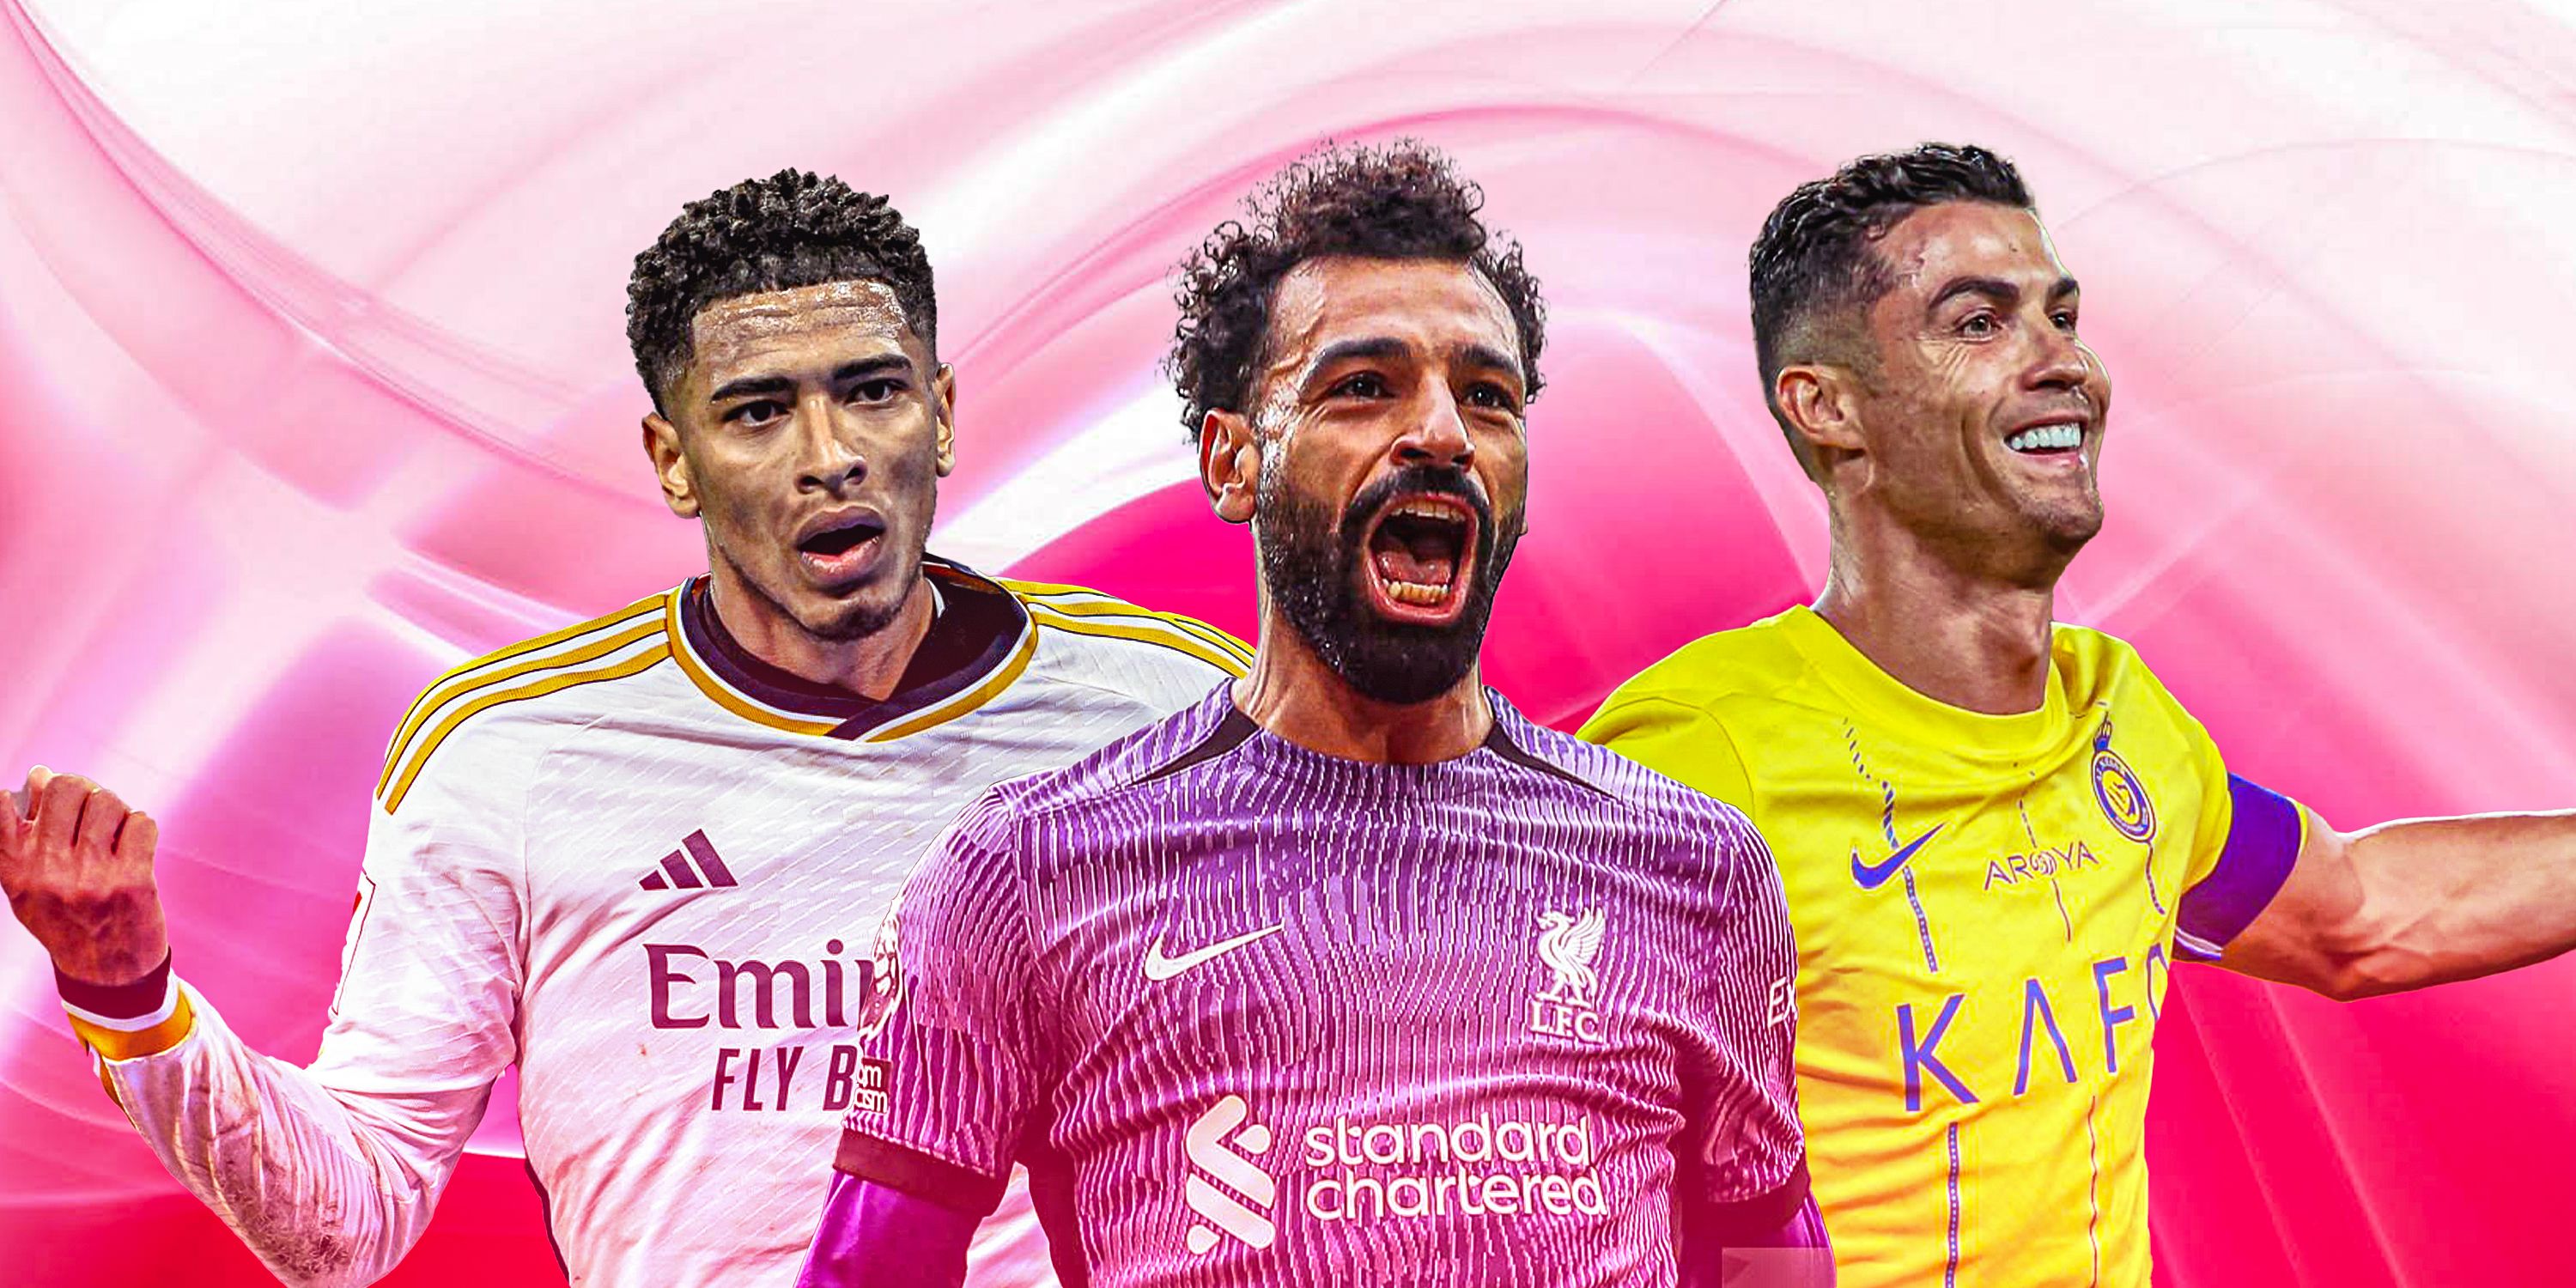 Featured Image featuring Real Madrid's Jude Bellingham, Liverpool's Mohamed Salah and Al-Nassr's Cristiano Ronaldo.